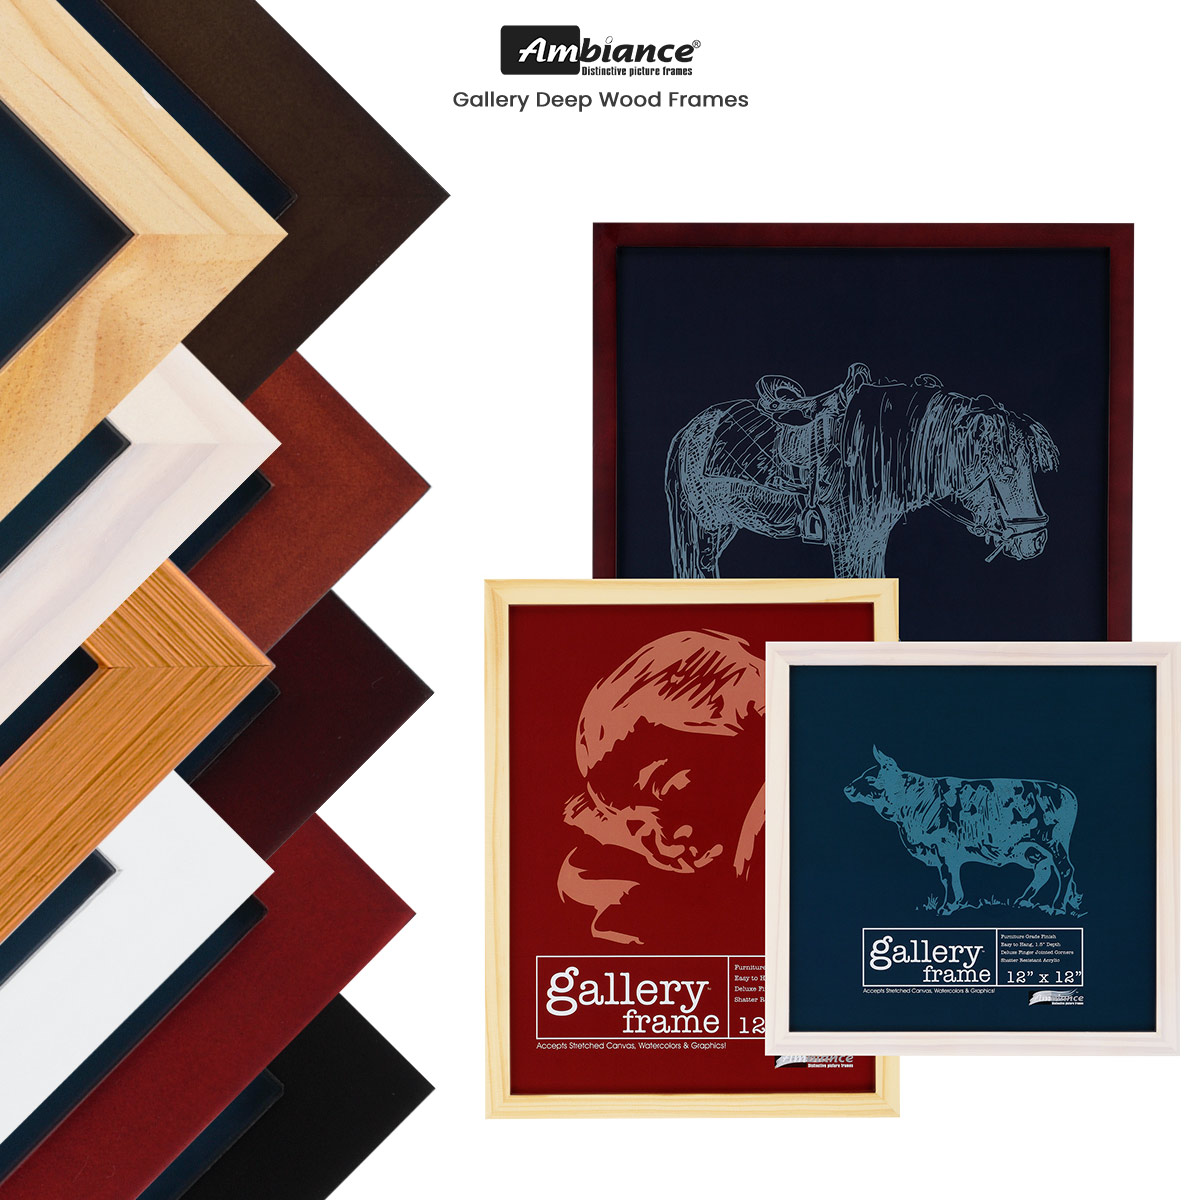 Ambiance Gallery 1.5in Deep Wood Frames